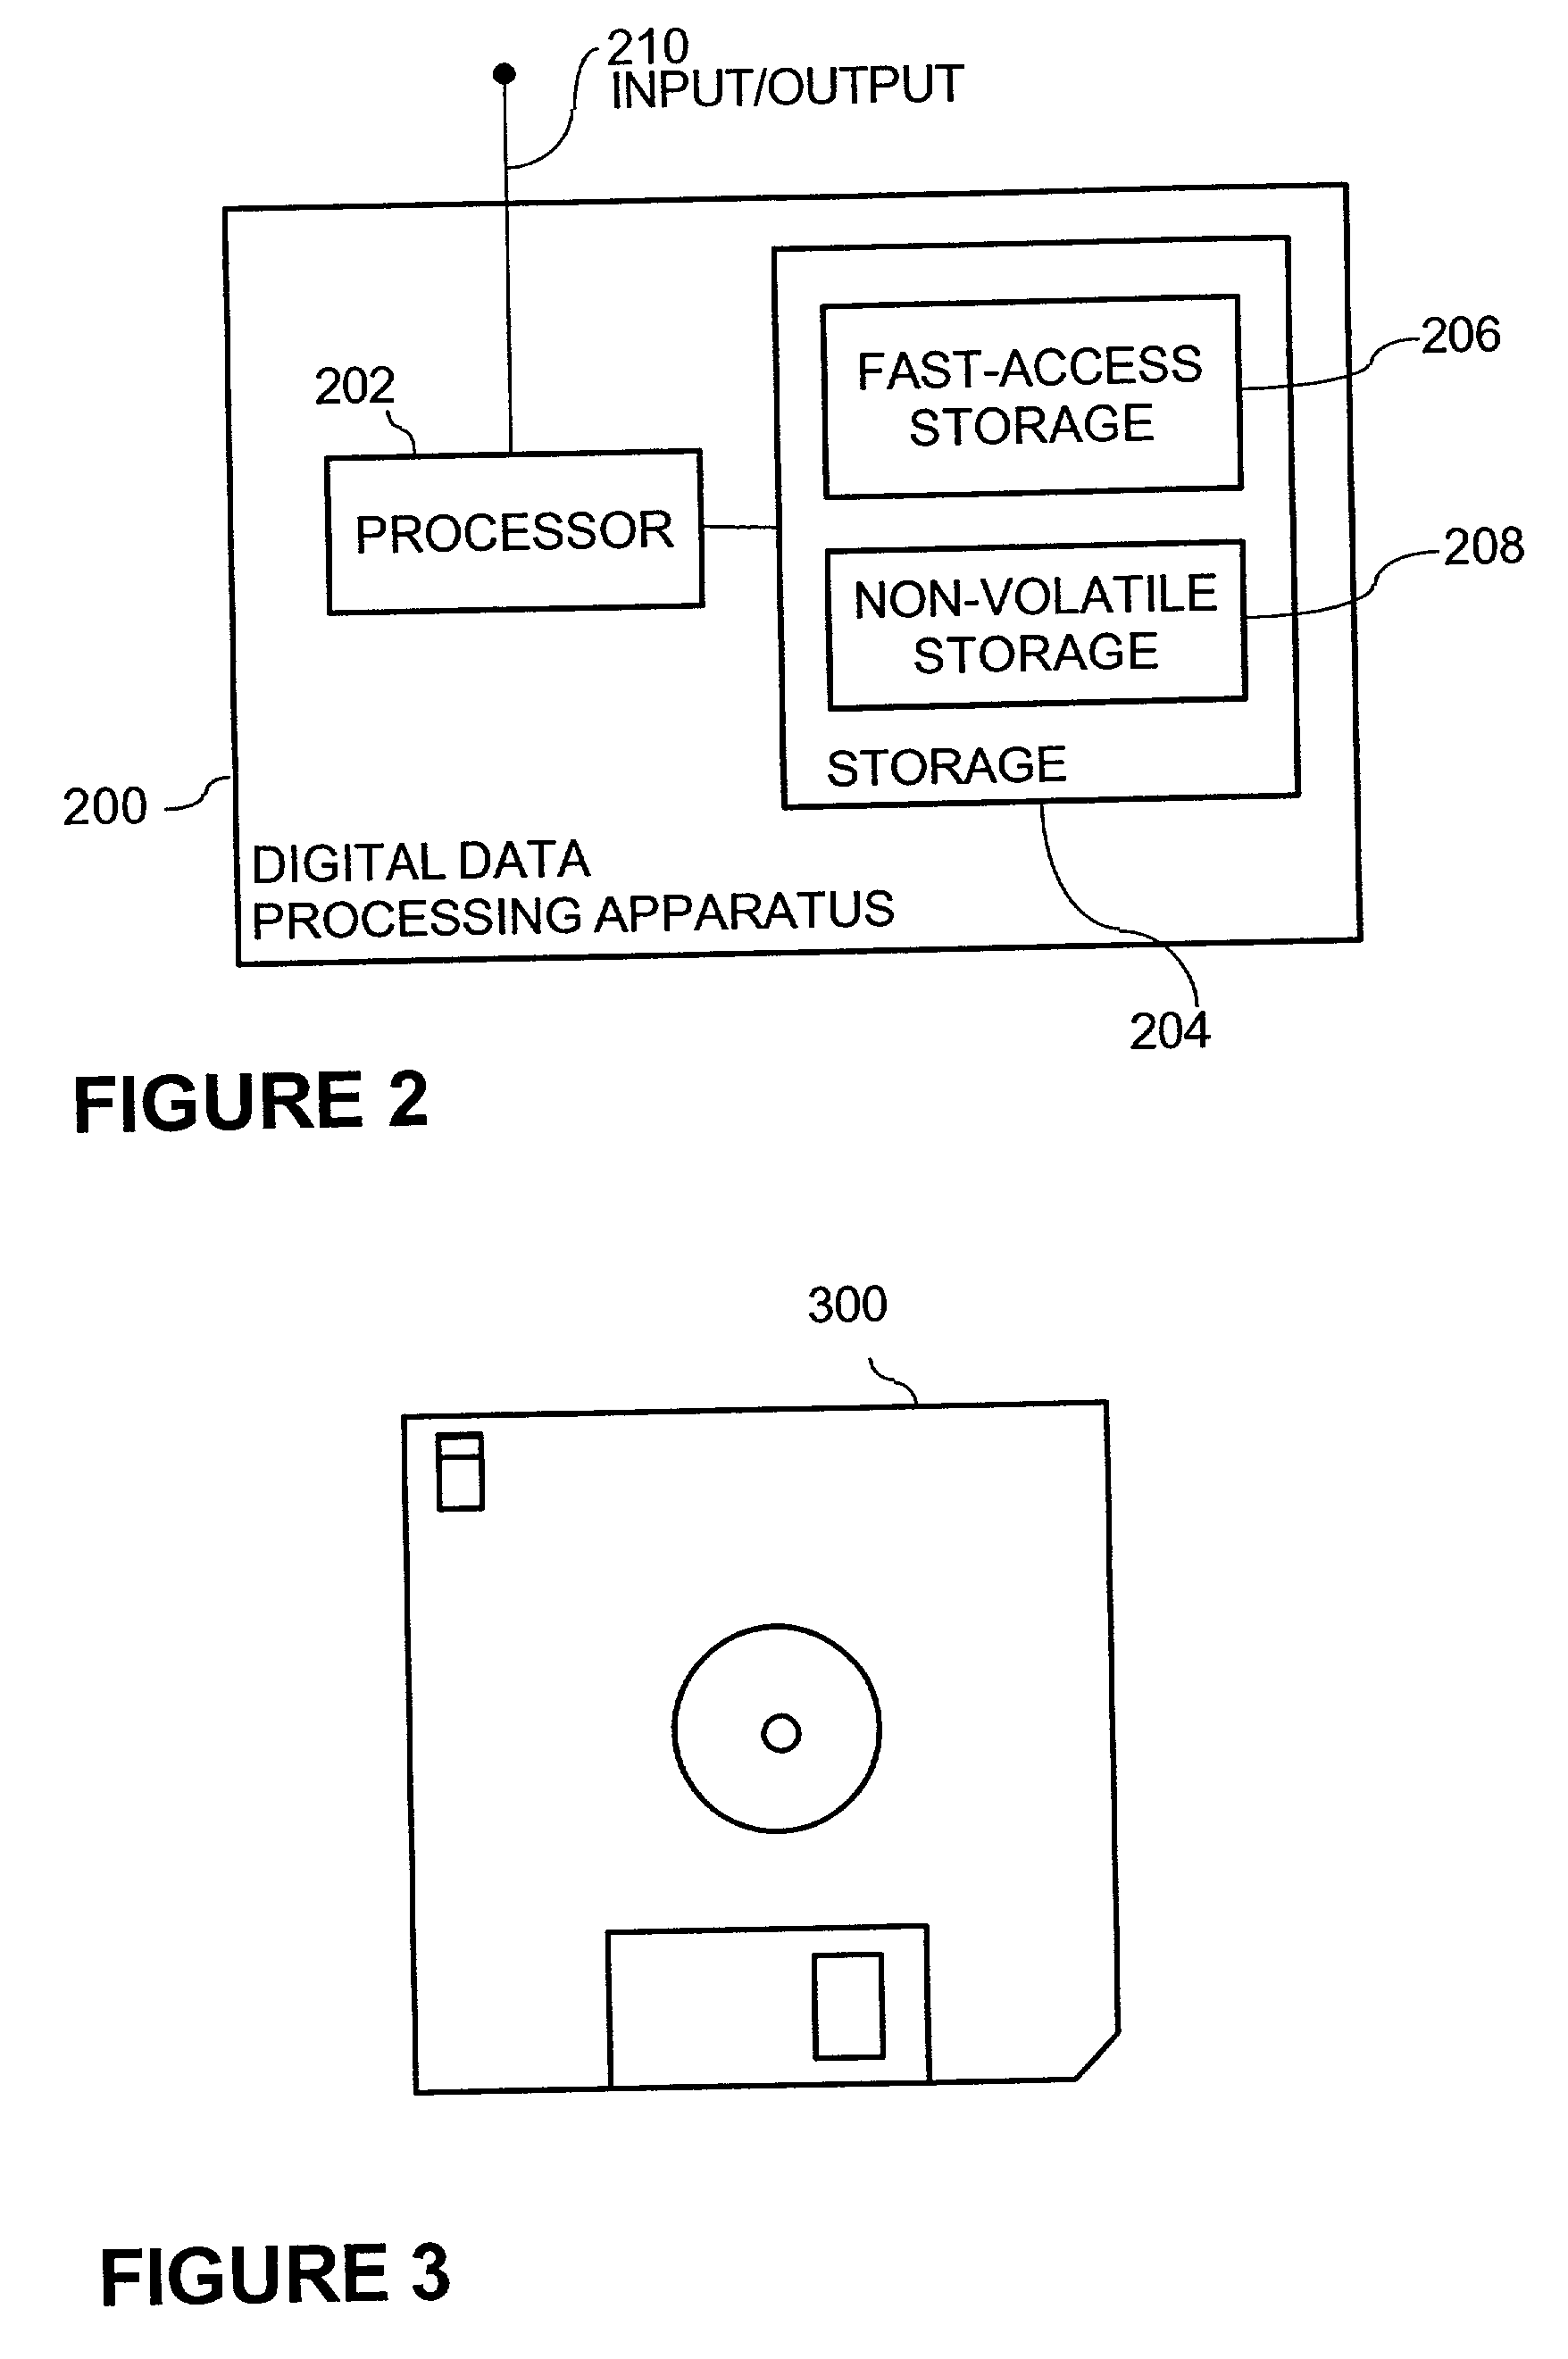 Battery management system employing software controls upon power failure to estimate battery duration based on battery/equipment profiles and real-time battery usage